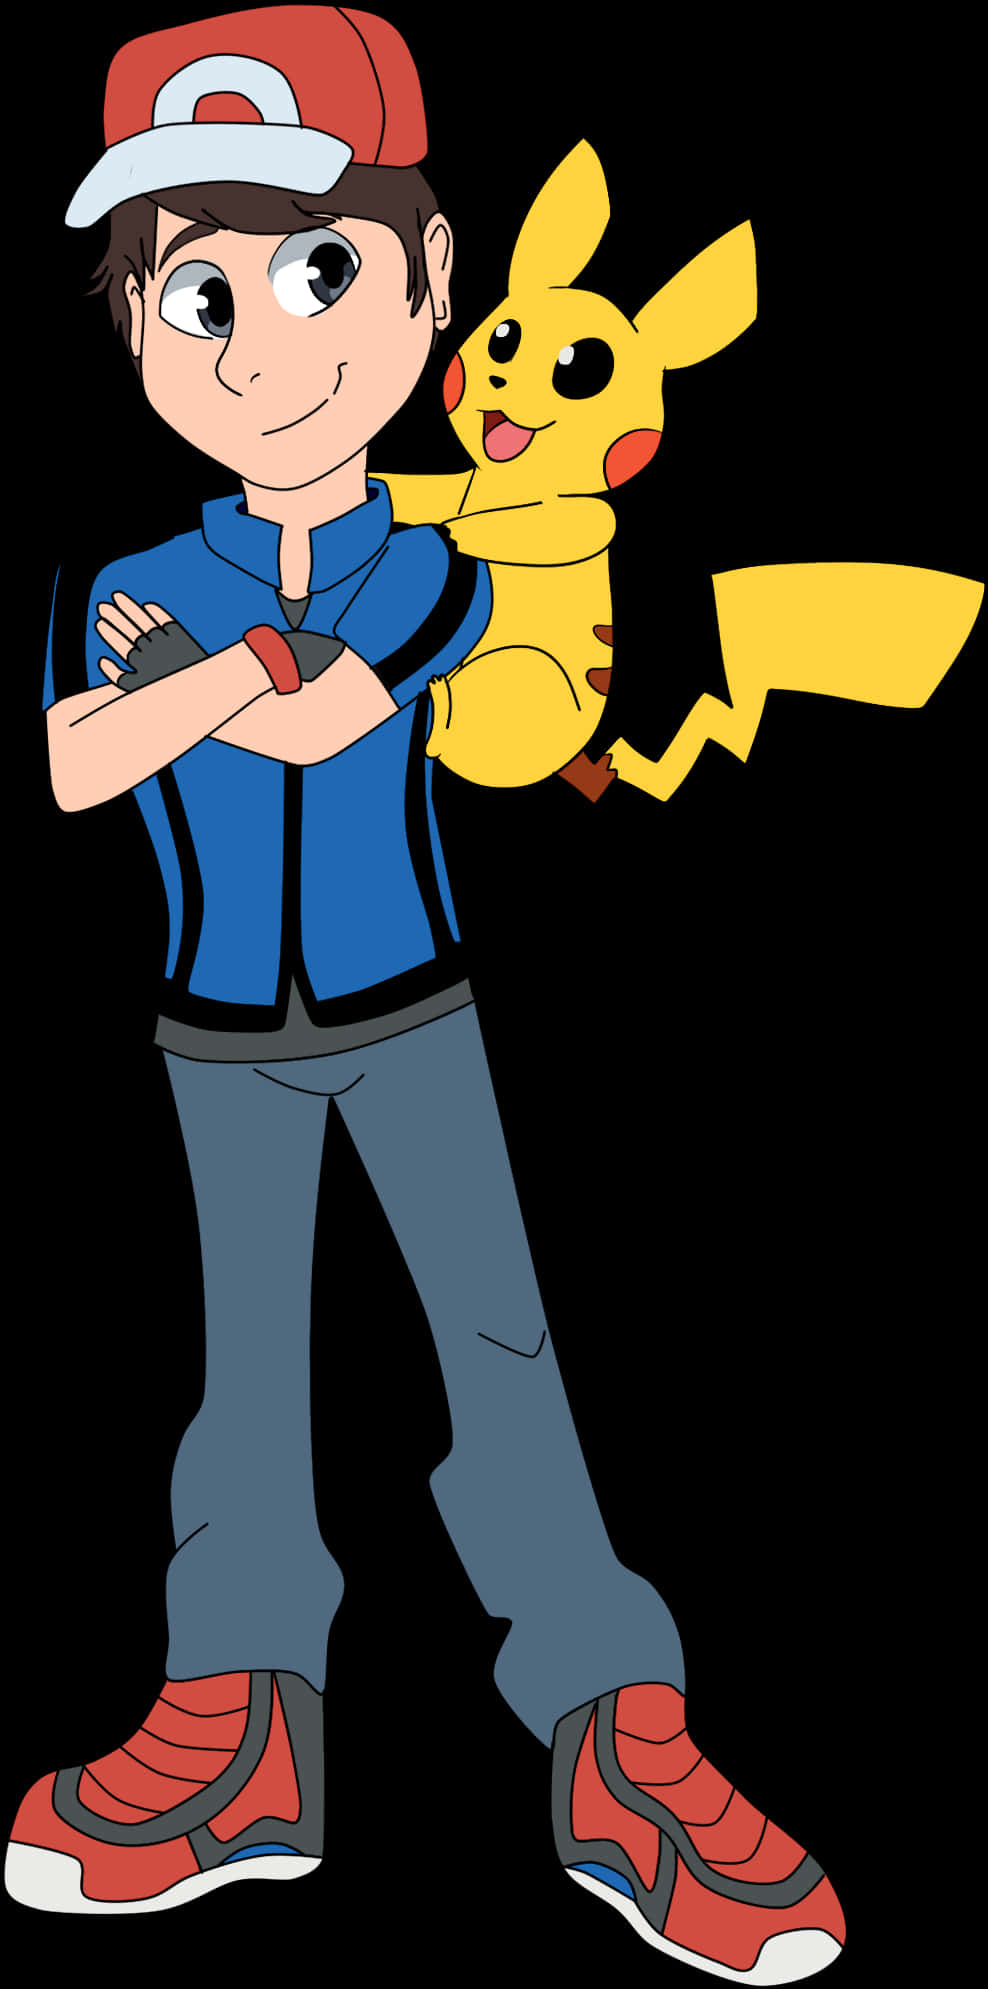 Ashand Pikachu Friends Forever PNG image